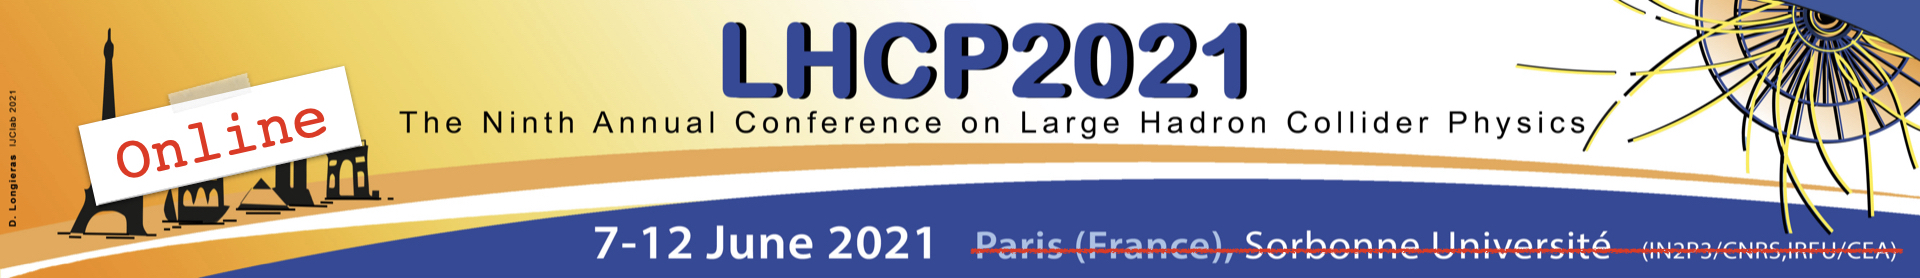 9th Edition of the Large Hadron Collider Physics Conference